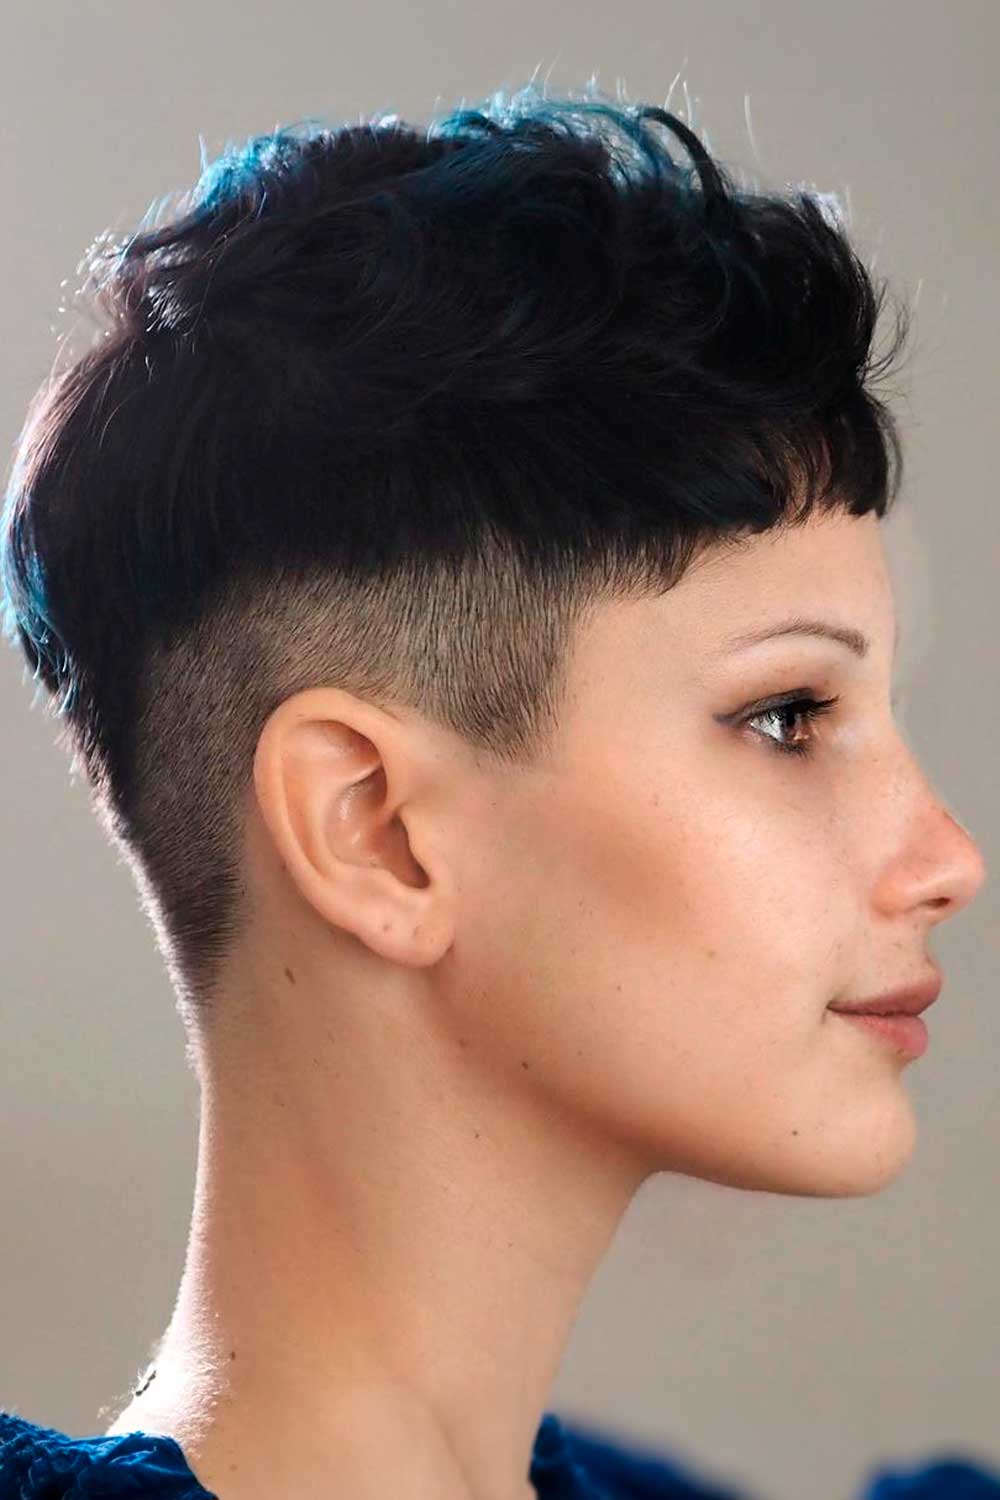 French Crop Haircut #androgynoushaircuts #androgynoushairstyles